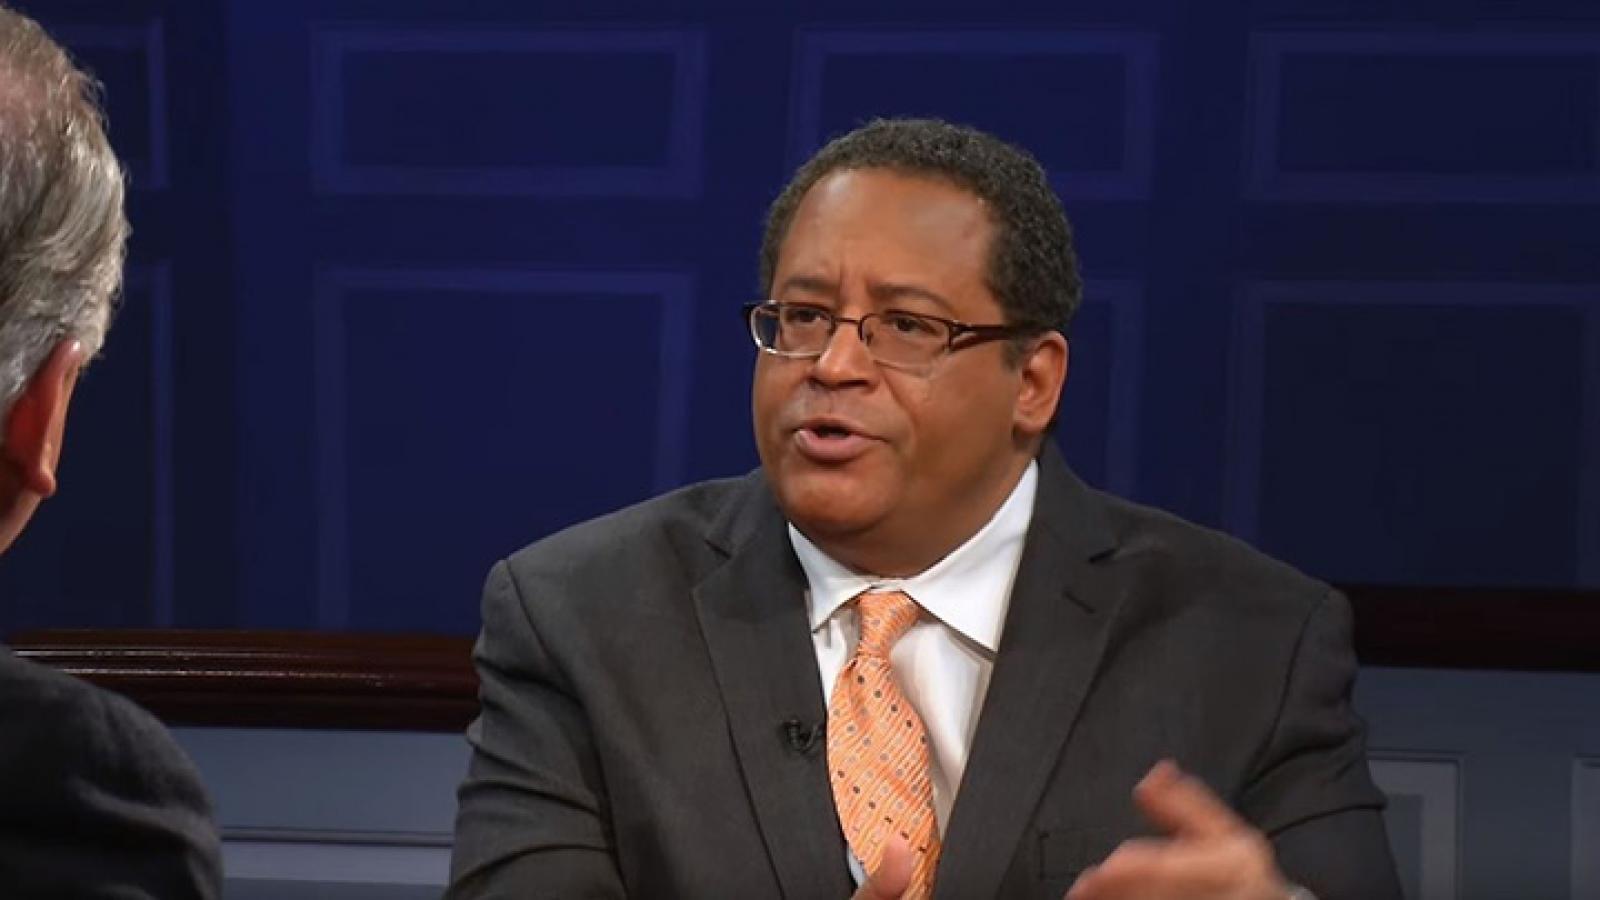 Michael Eric Dyson discusses how to increase prosecutions of police violence